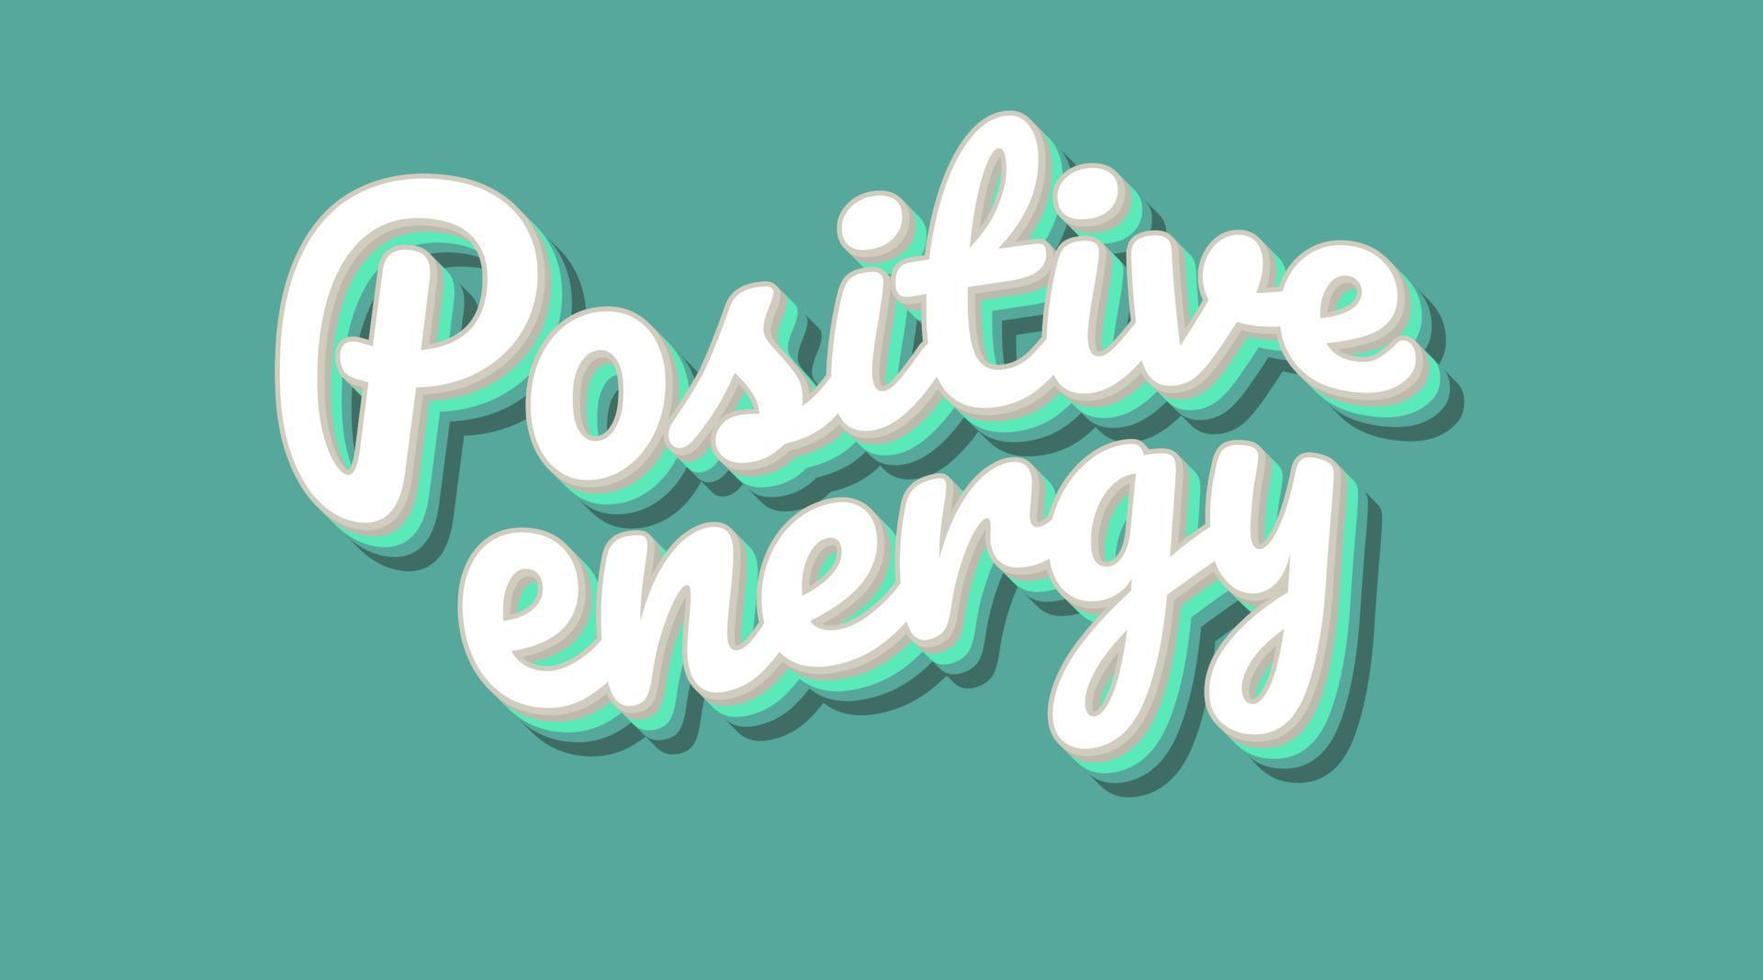 Lettering Typography With Positive Energy Text Slogan vector